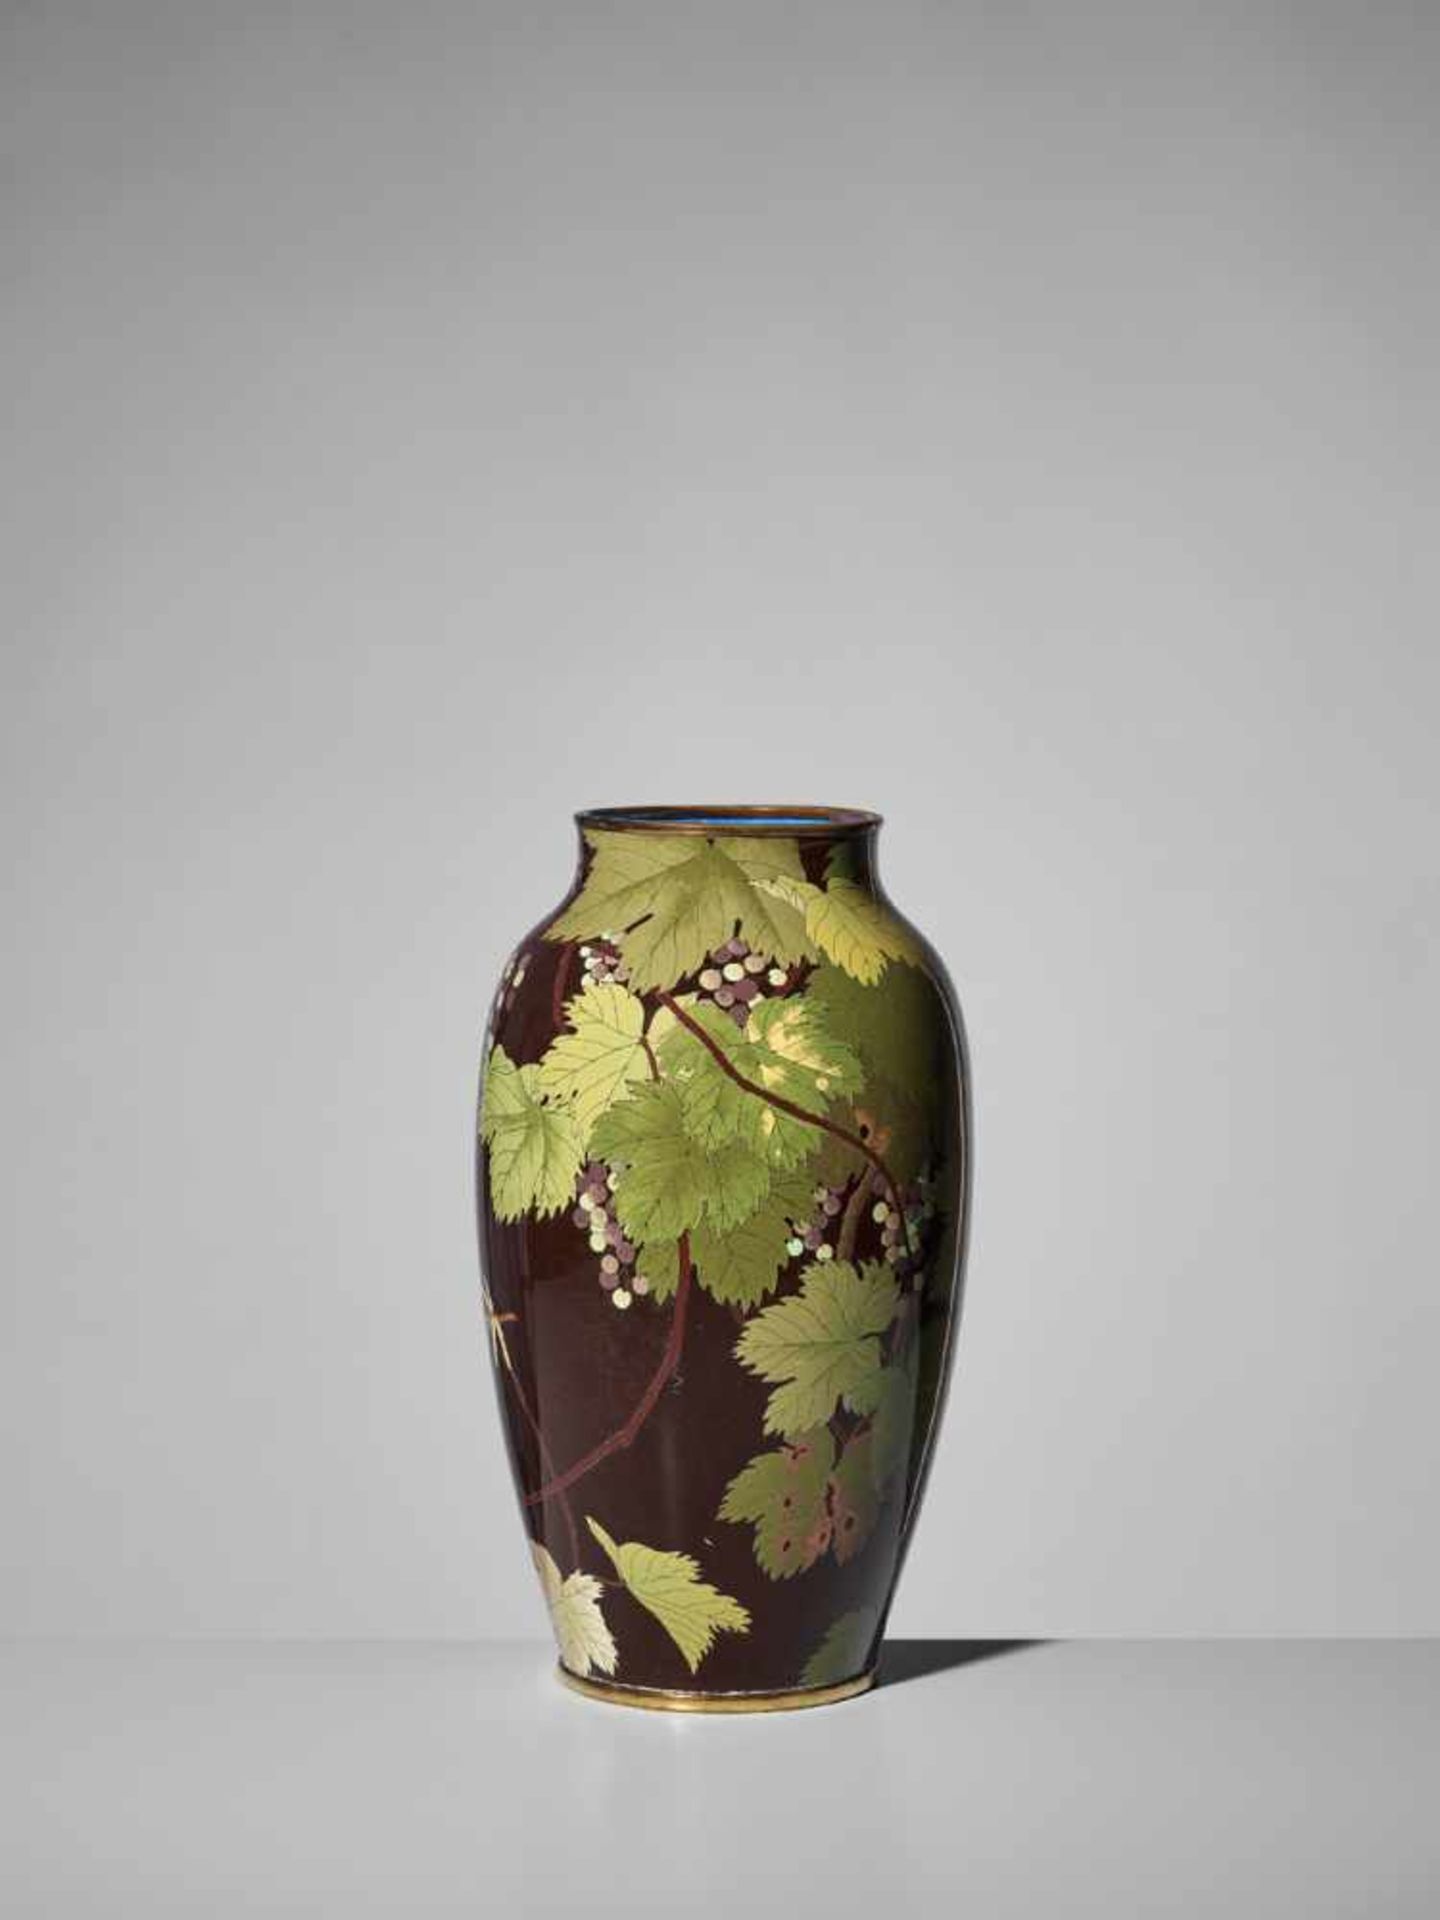 A LARGE AND FINE CLOISONNÉ ENAMEL VASE ATTRIBUTED TO THE ANDO COMPANY Unsigned, attributed to the - Image 5 of 8